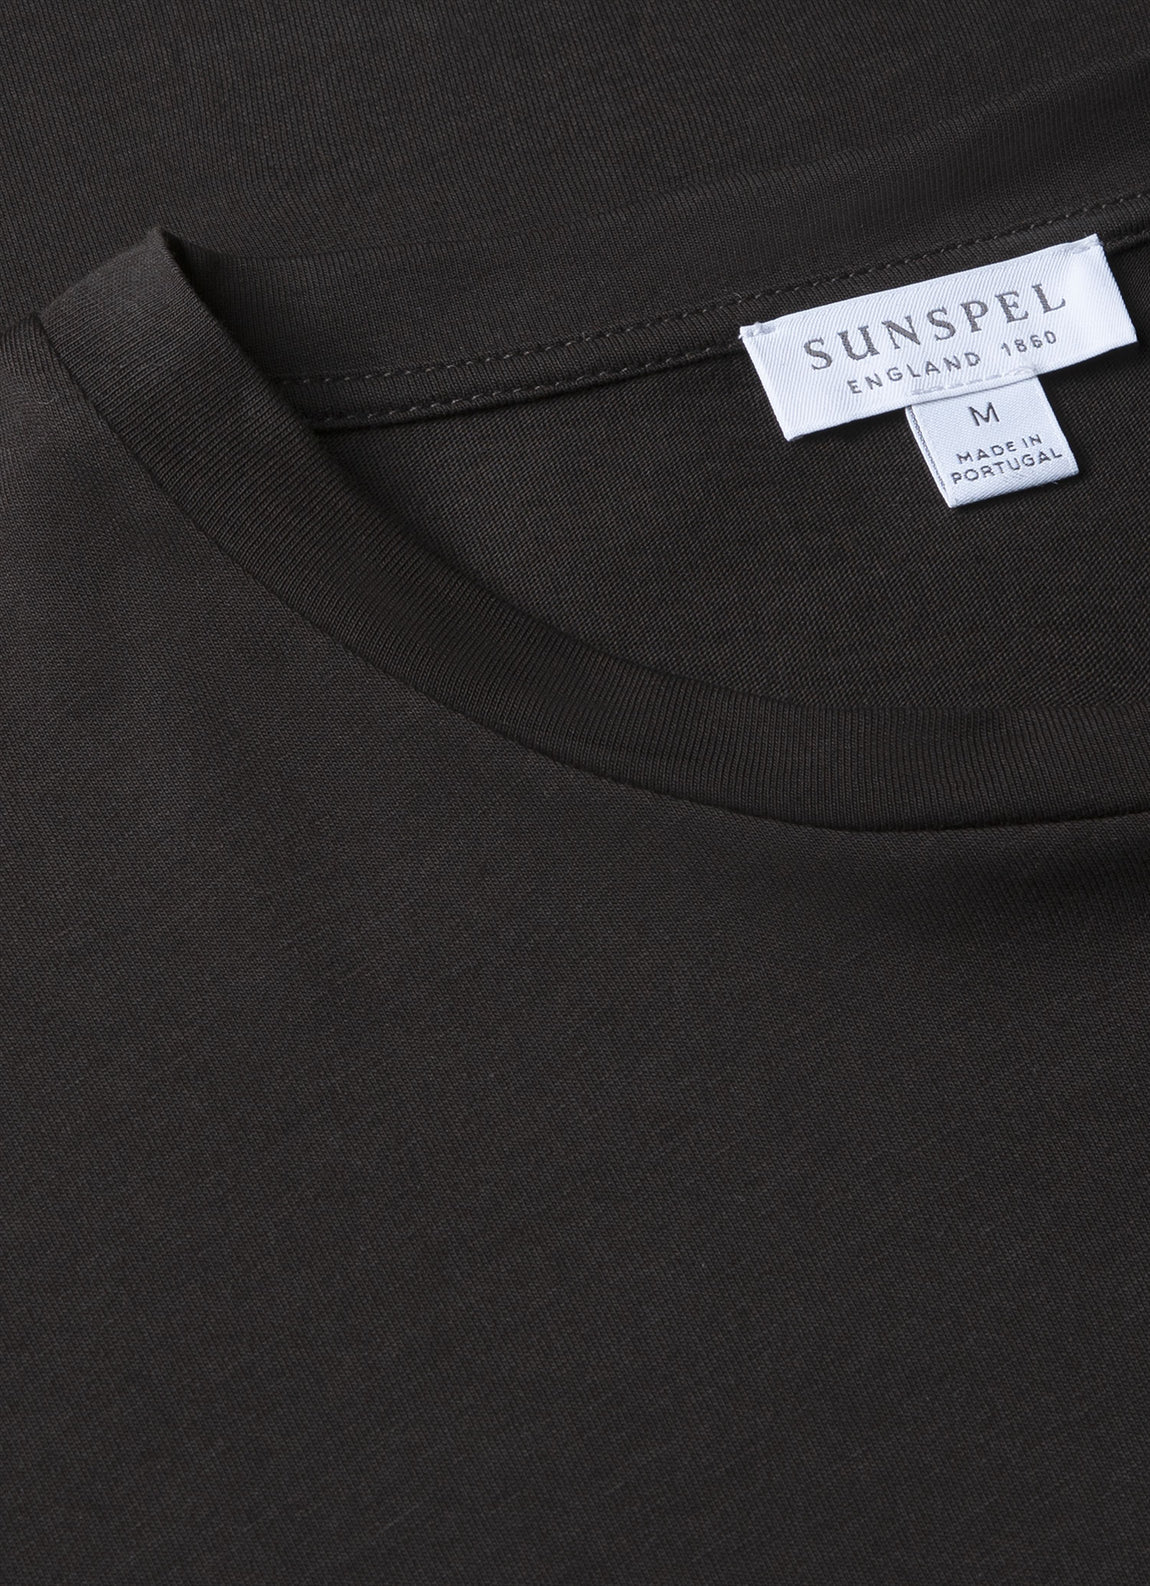 Men's Riviera Midweight T-shirt in Coffee